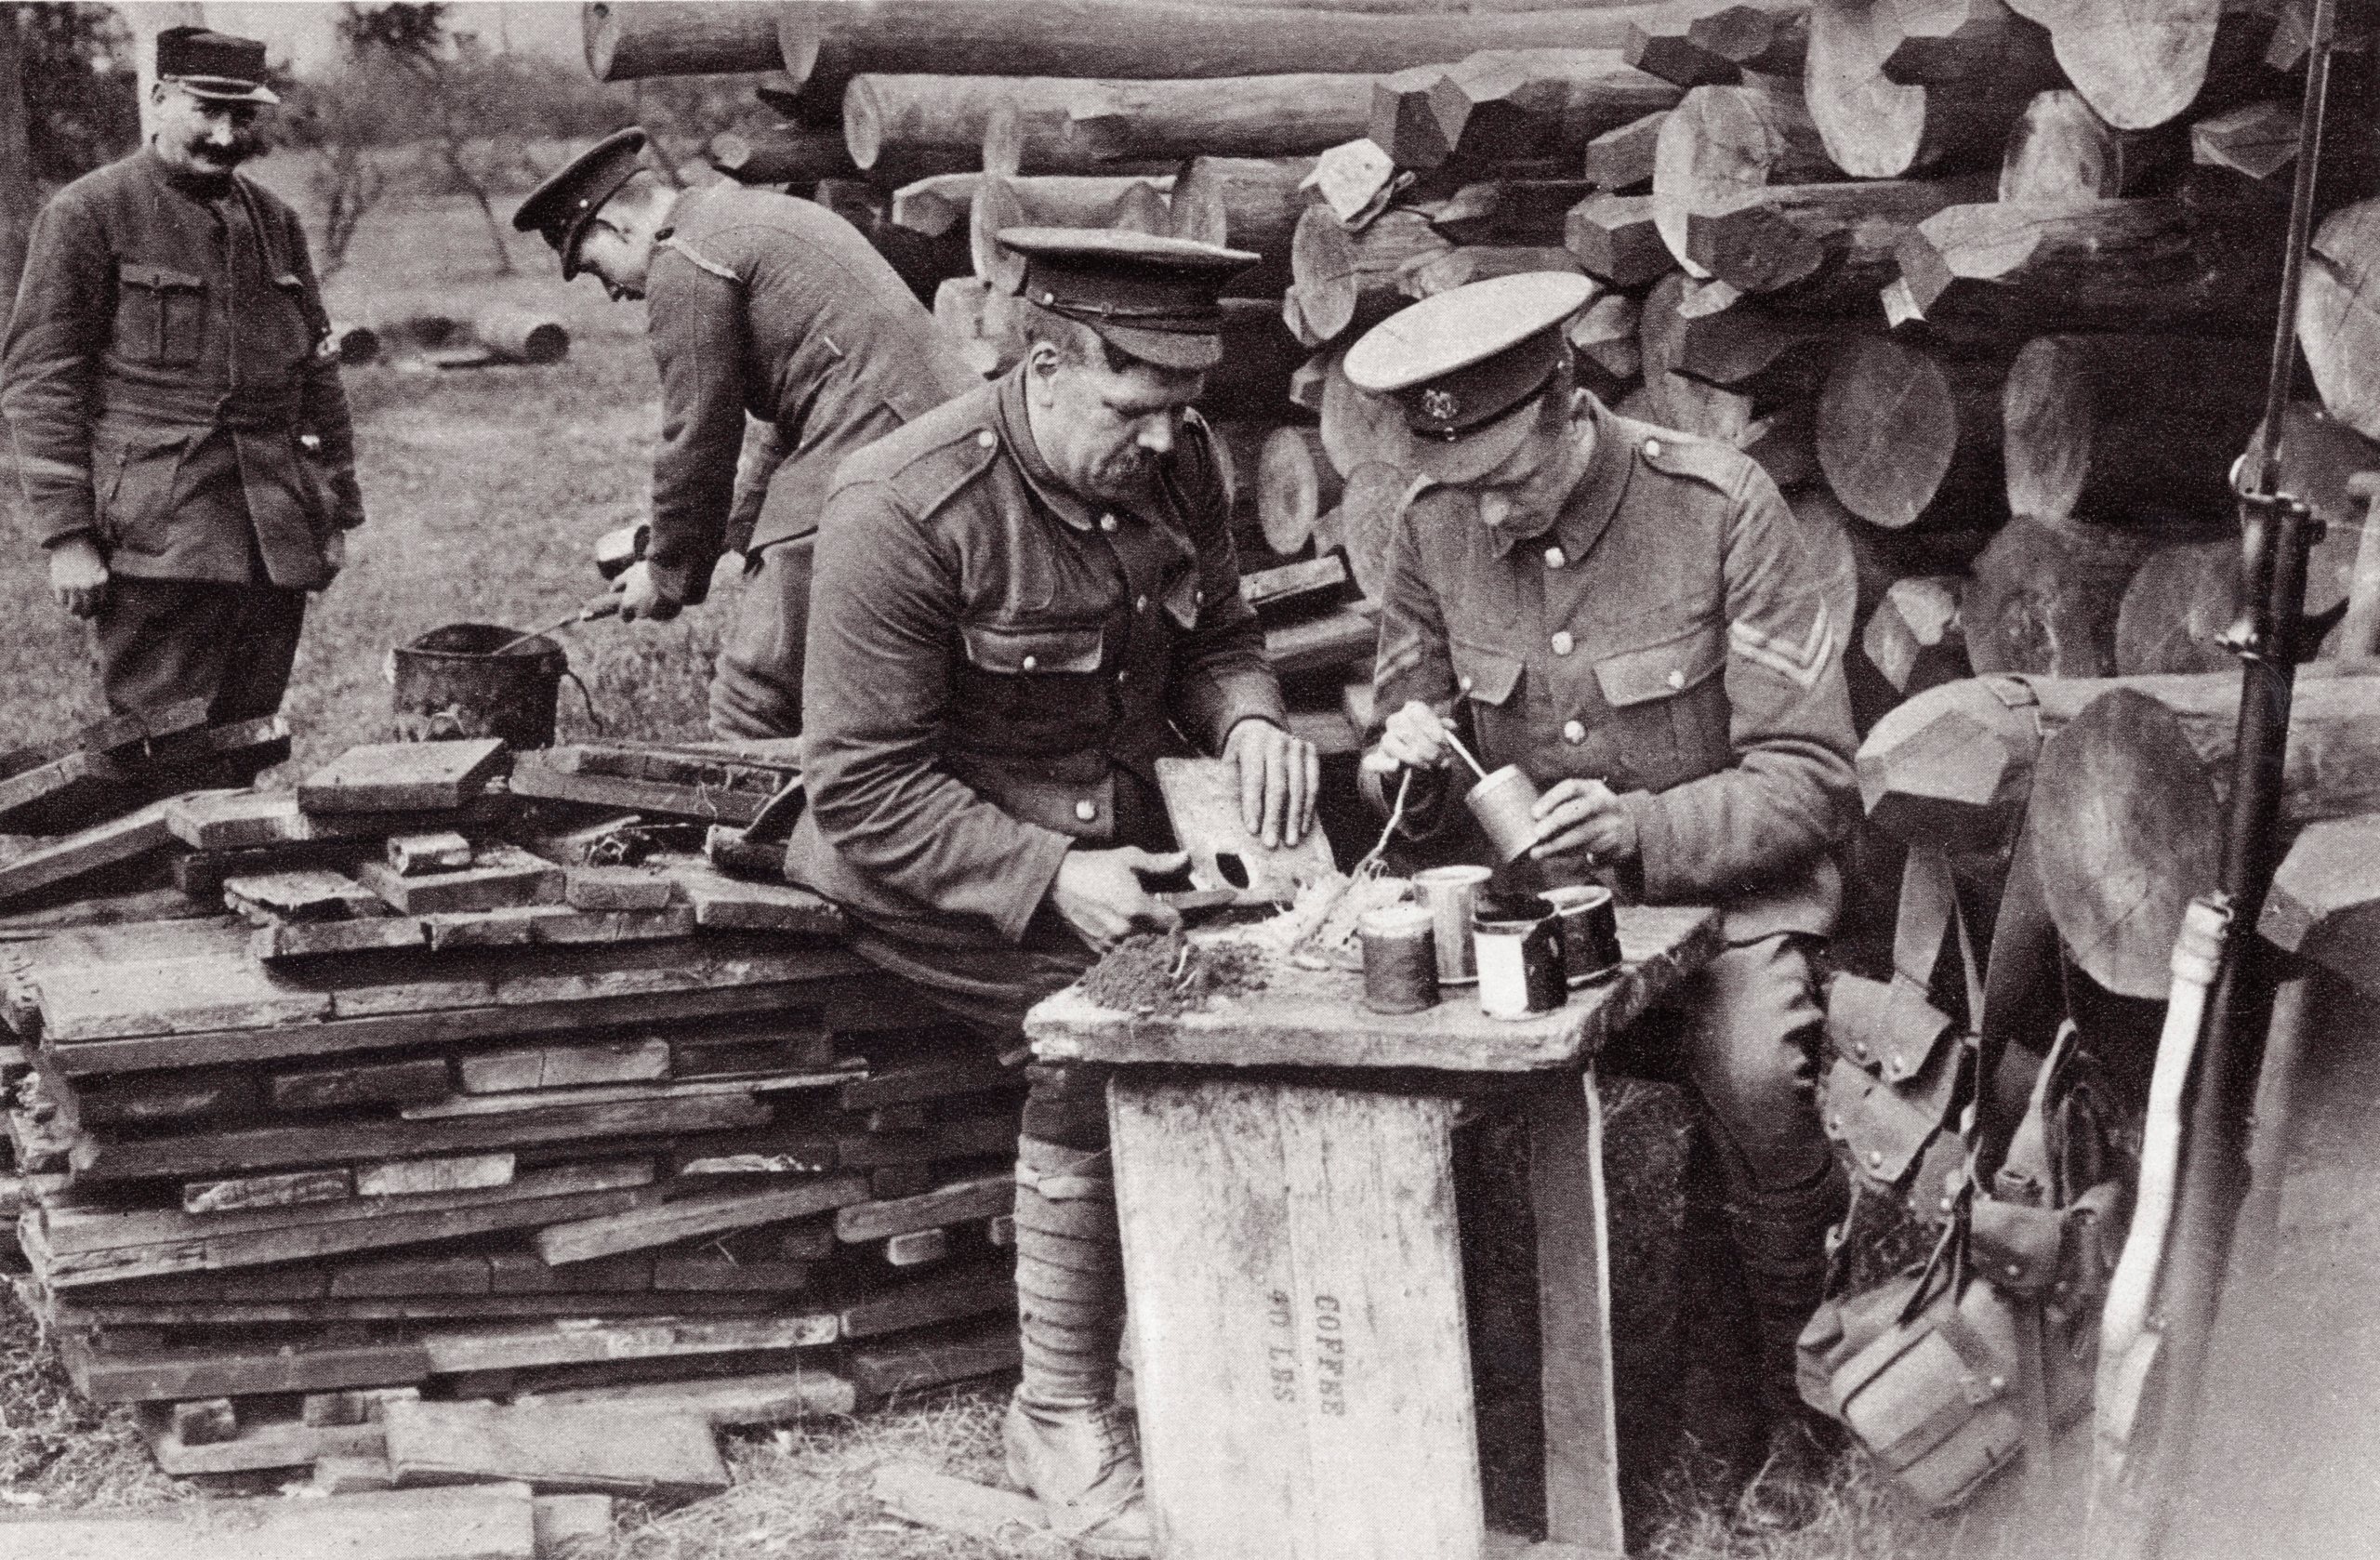 Tobacco tins as hand grenades. Men of the Royal Engineers loading reserve stocks in rear of the trenches during the First World War. From The Illustrated War News published 1915